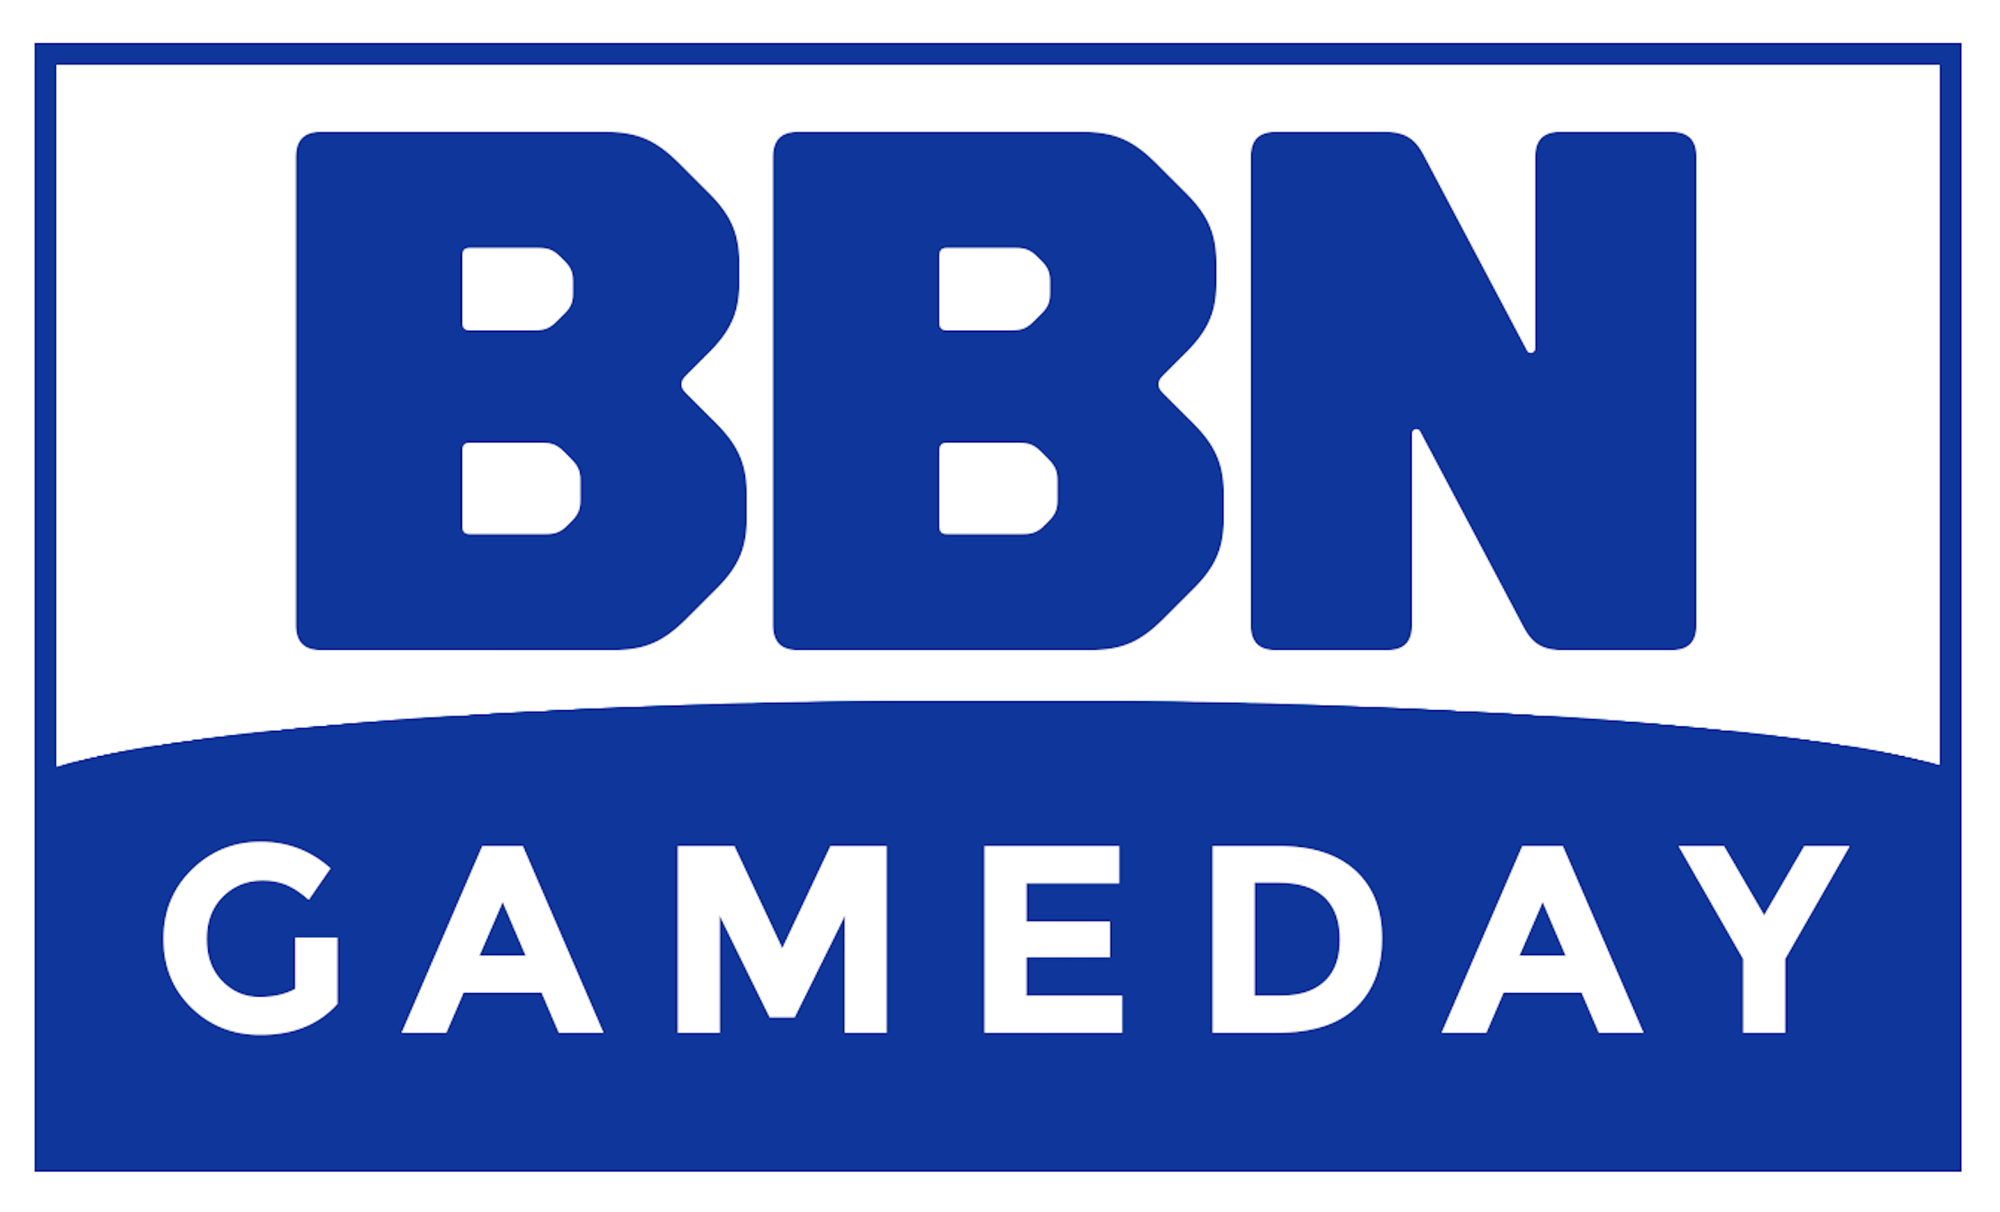 BBN Gameday February 5th 2022